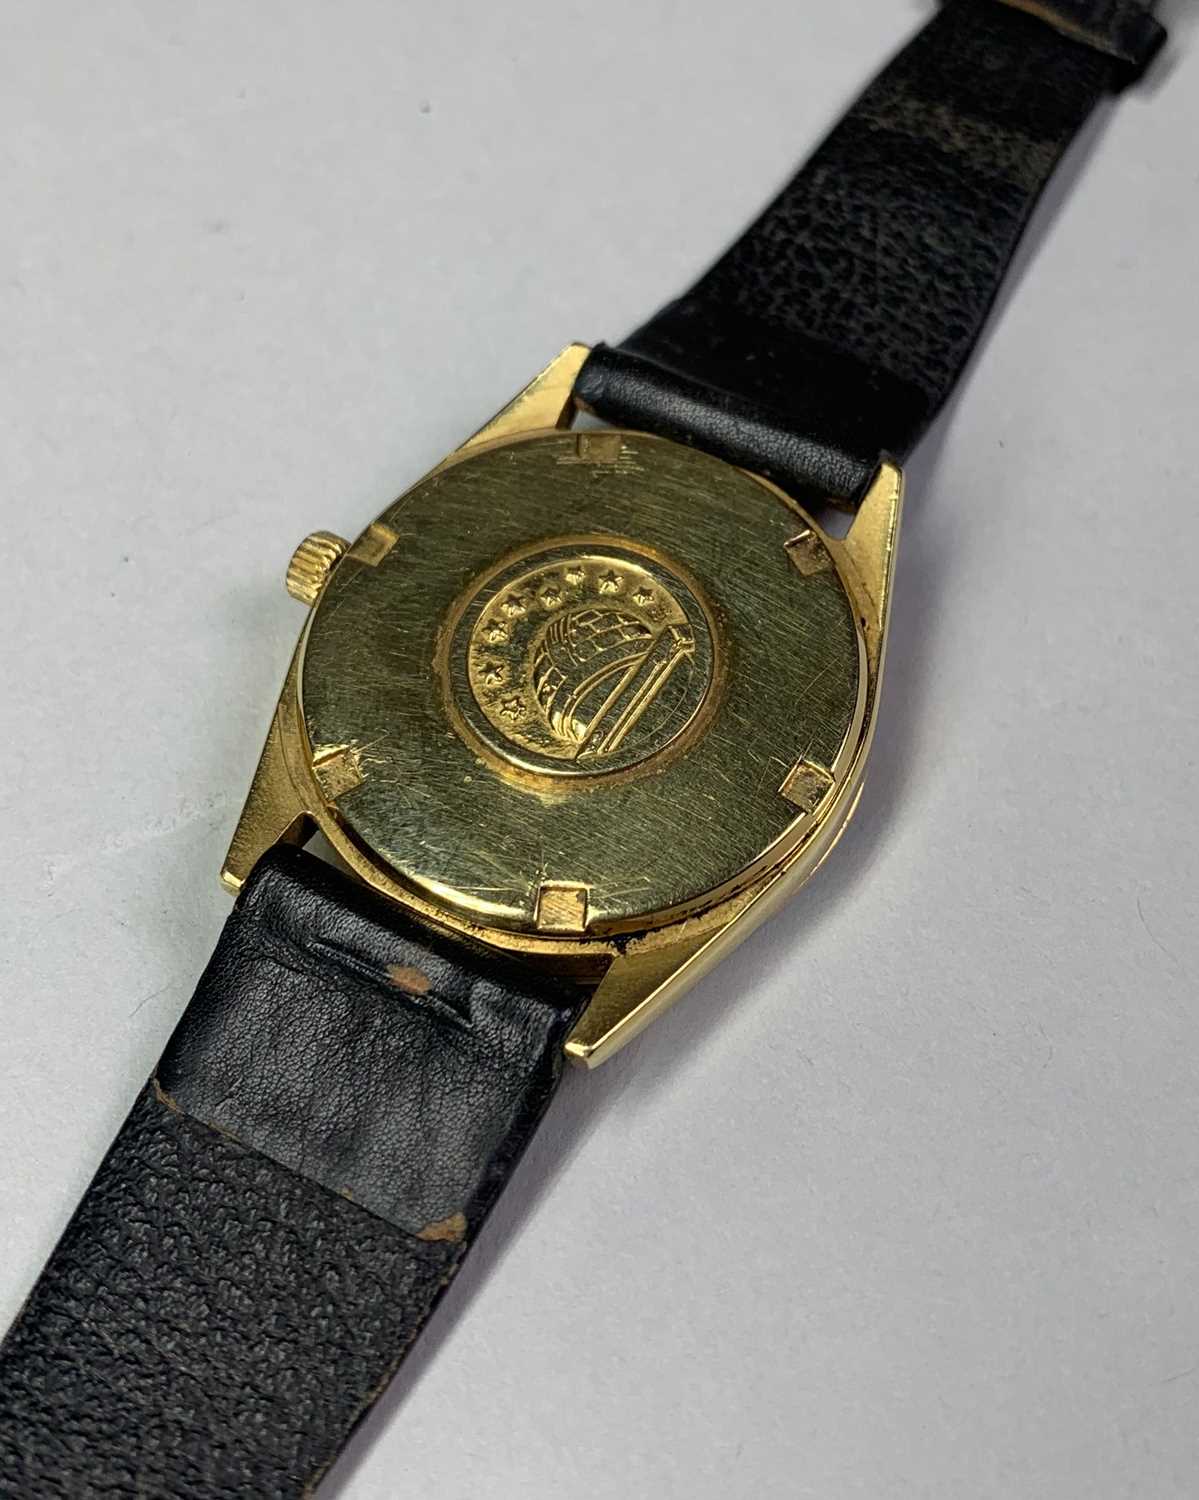 18K GOLD GENTS OMEGA 'CONSTELLATION' WRISTWATCH, ref. 1061, cal. 712 automatic 24J movement, - Image 6 of 6